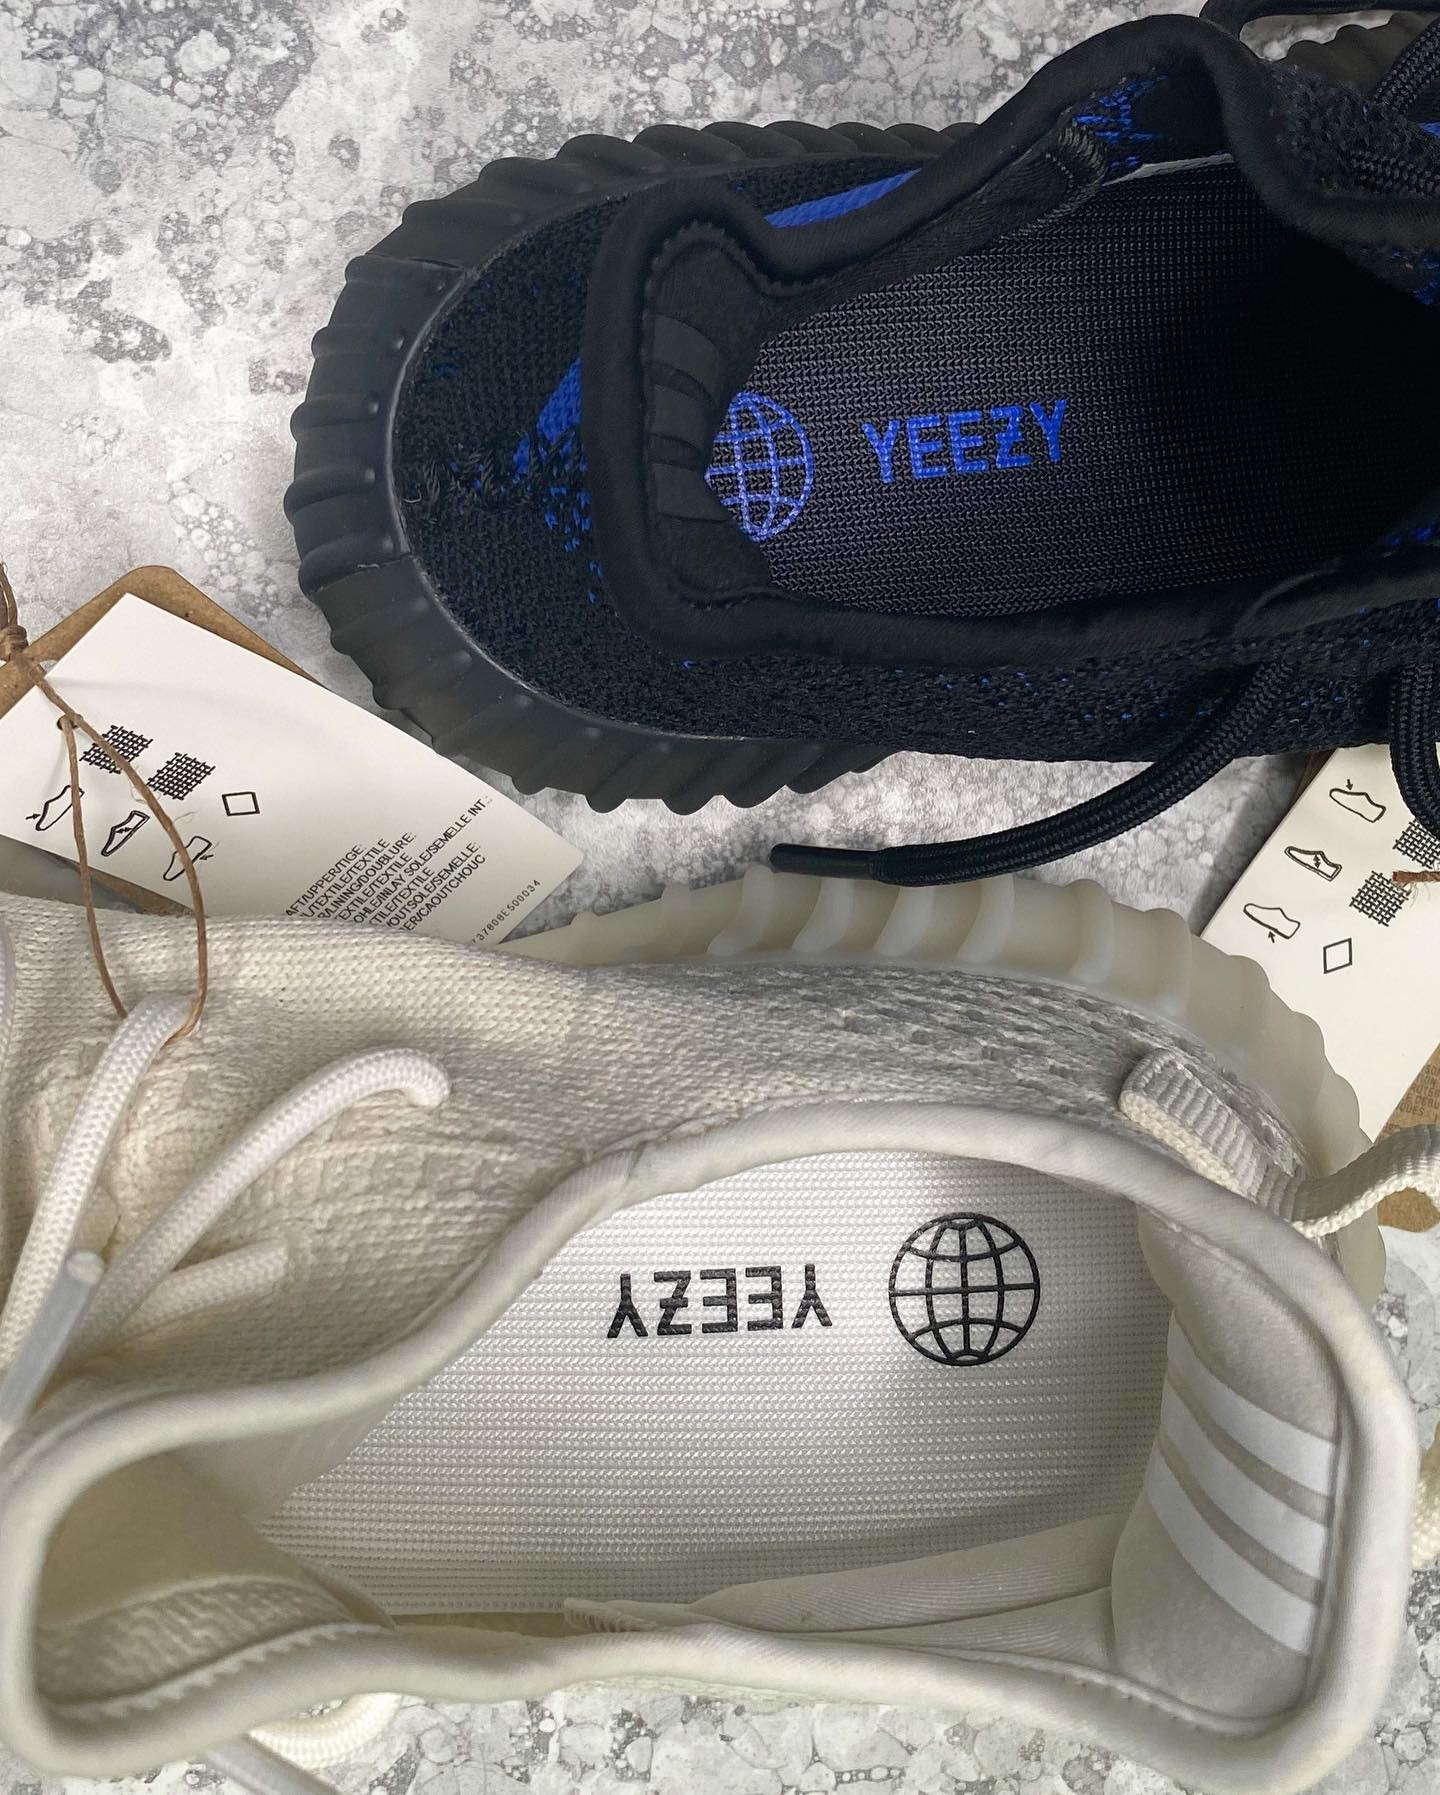 adidas YEEZY BOOST 350 V2 Dazzling Blue GY7164 Release Date